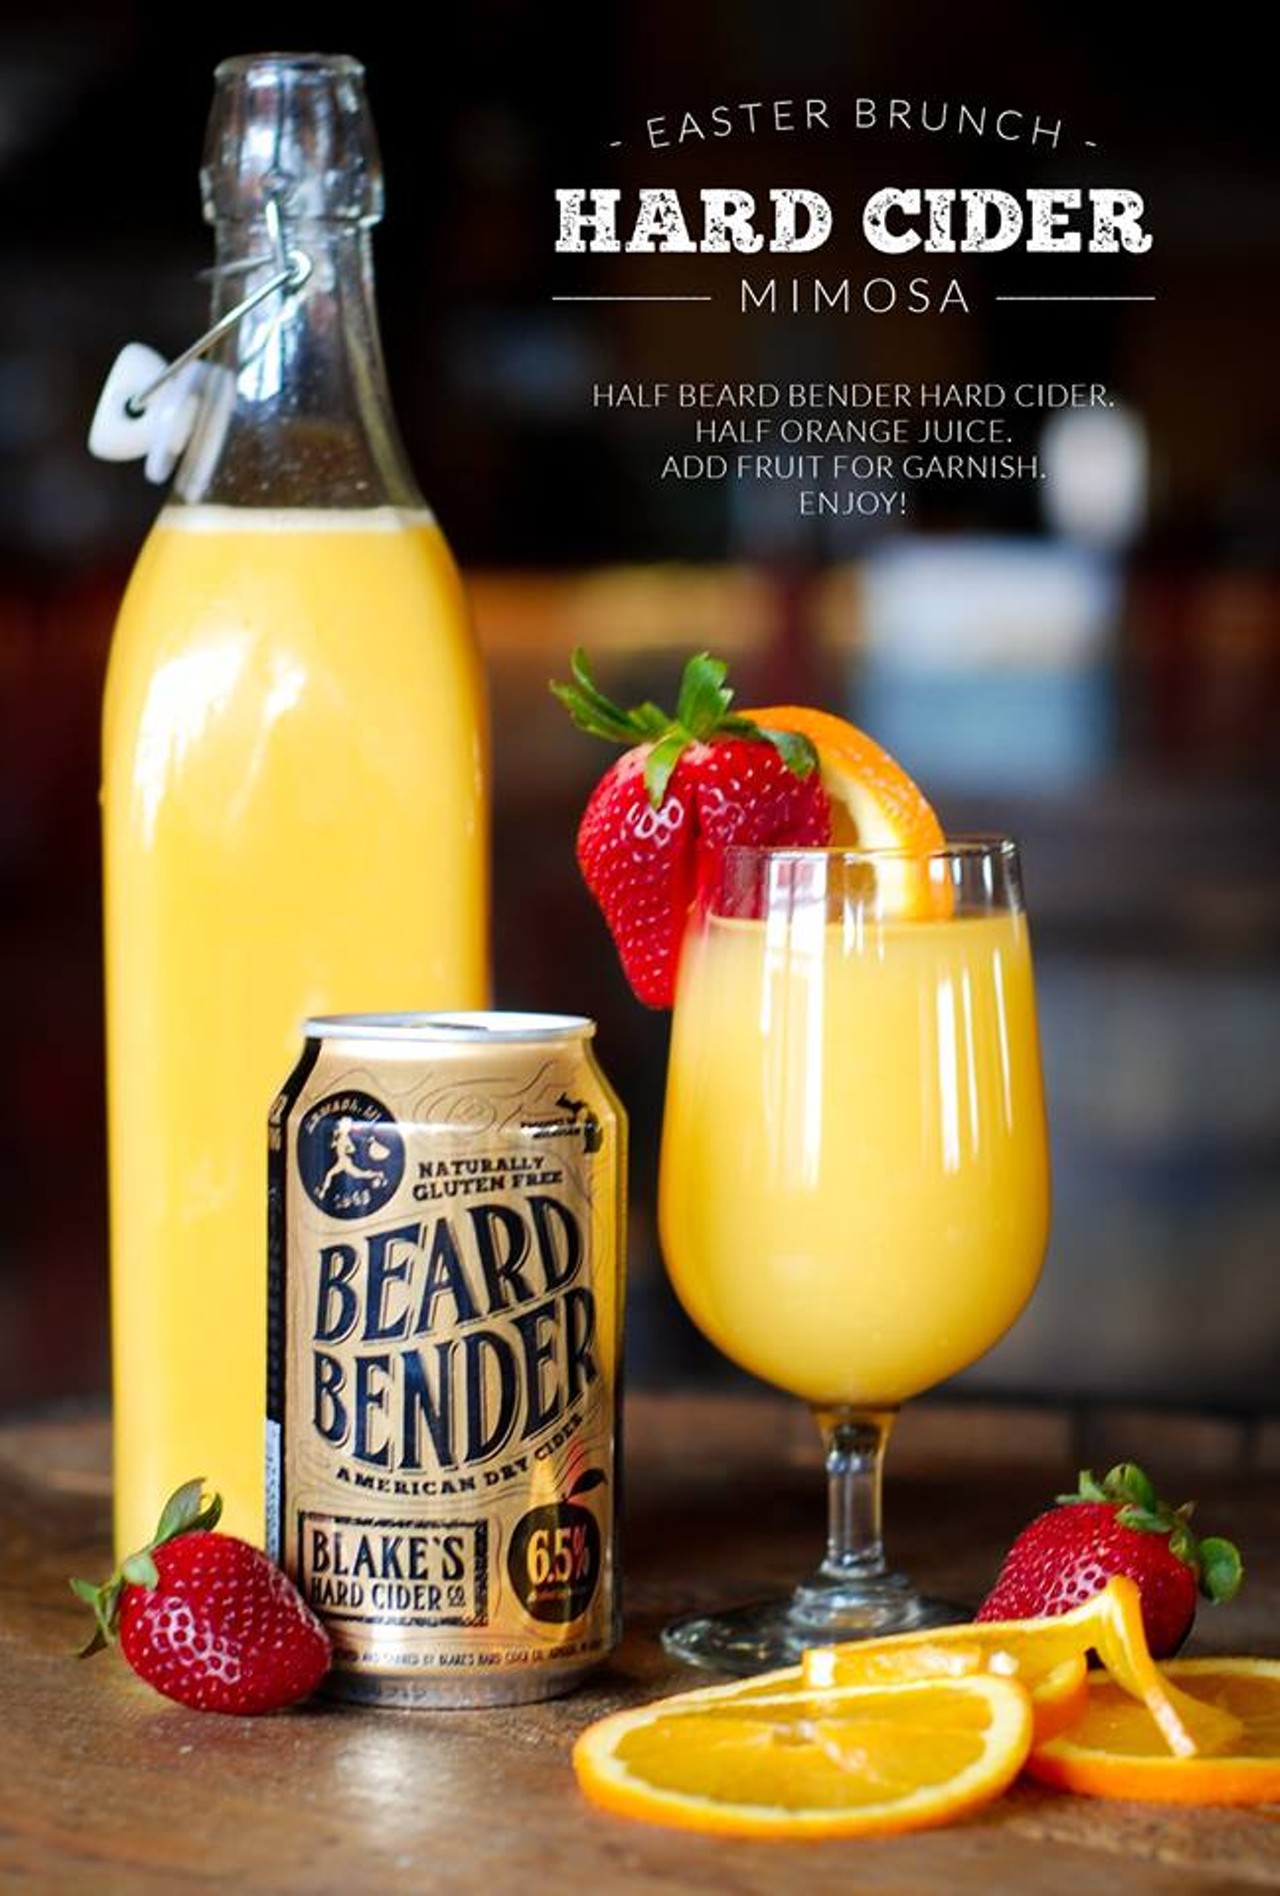 Beard Bender
6.5% ABV
Beard Bender comes from Blake's Hard Cider Co. in Armada, MI. This is a dryer cider, so if you're not a fan of the sweet stuff, this one is for you.